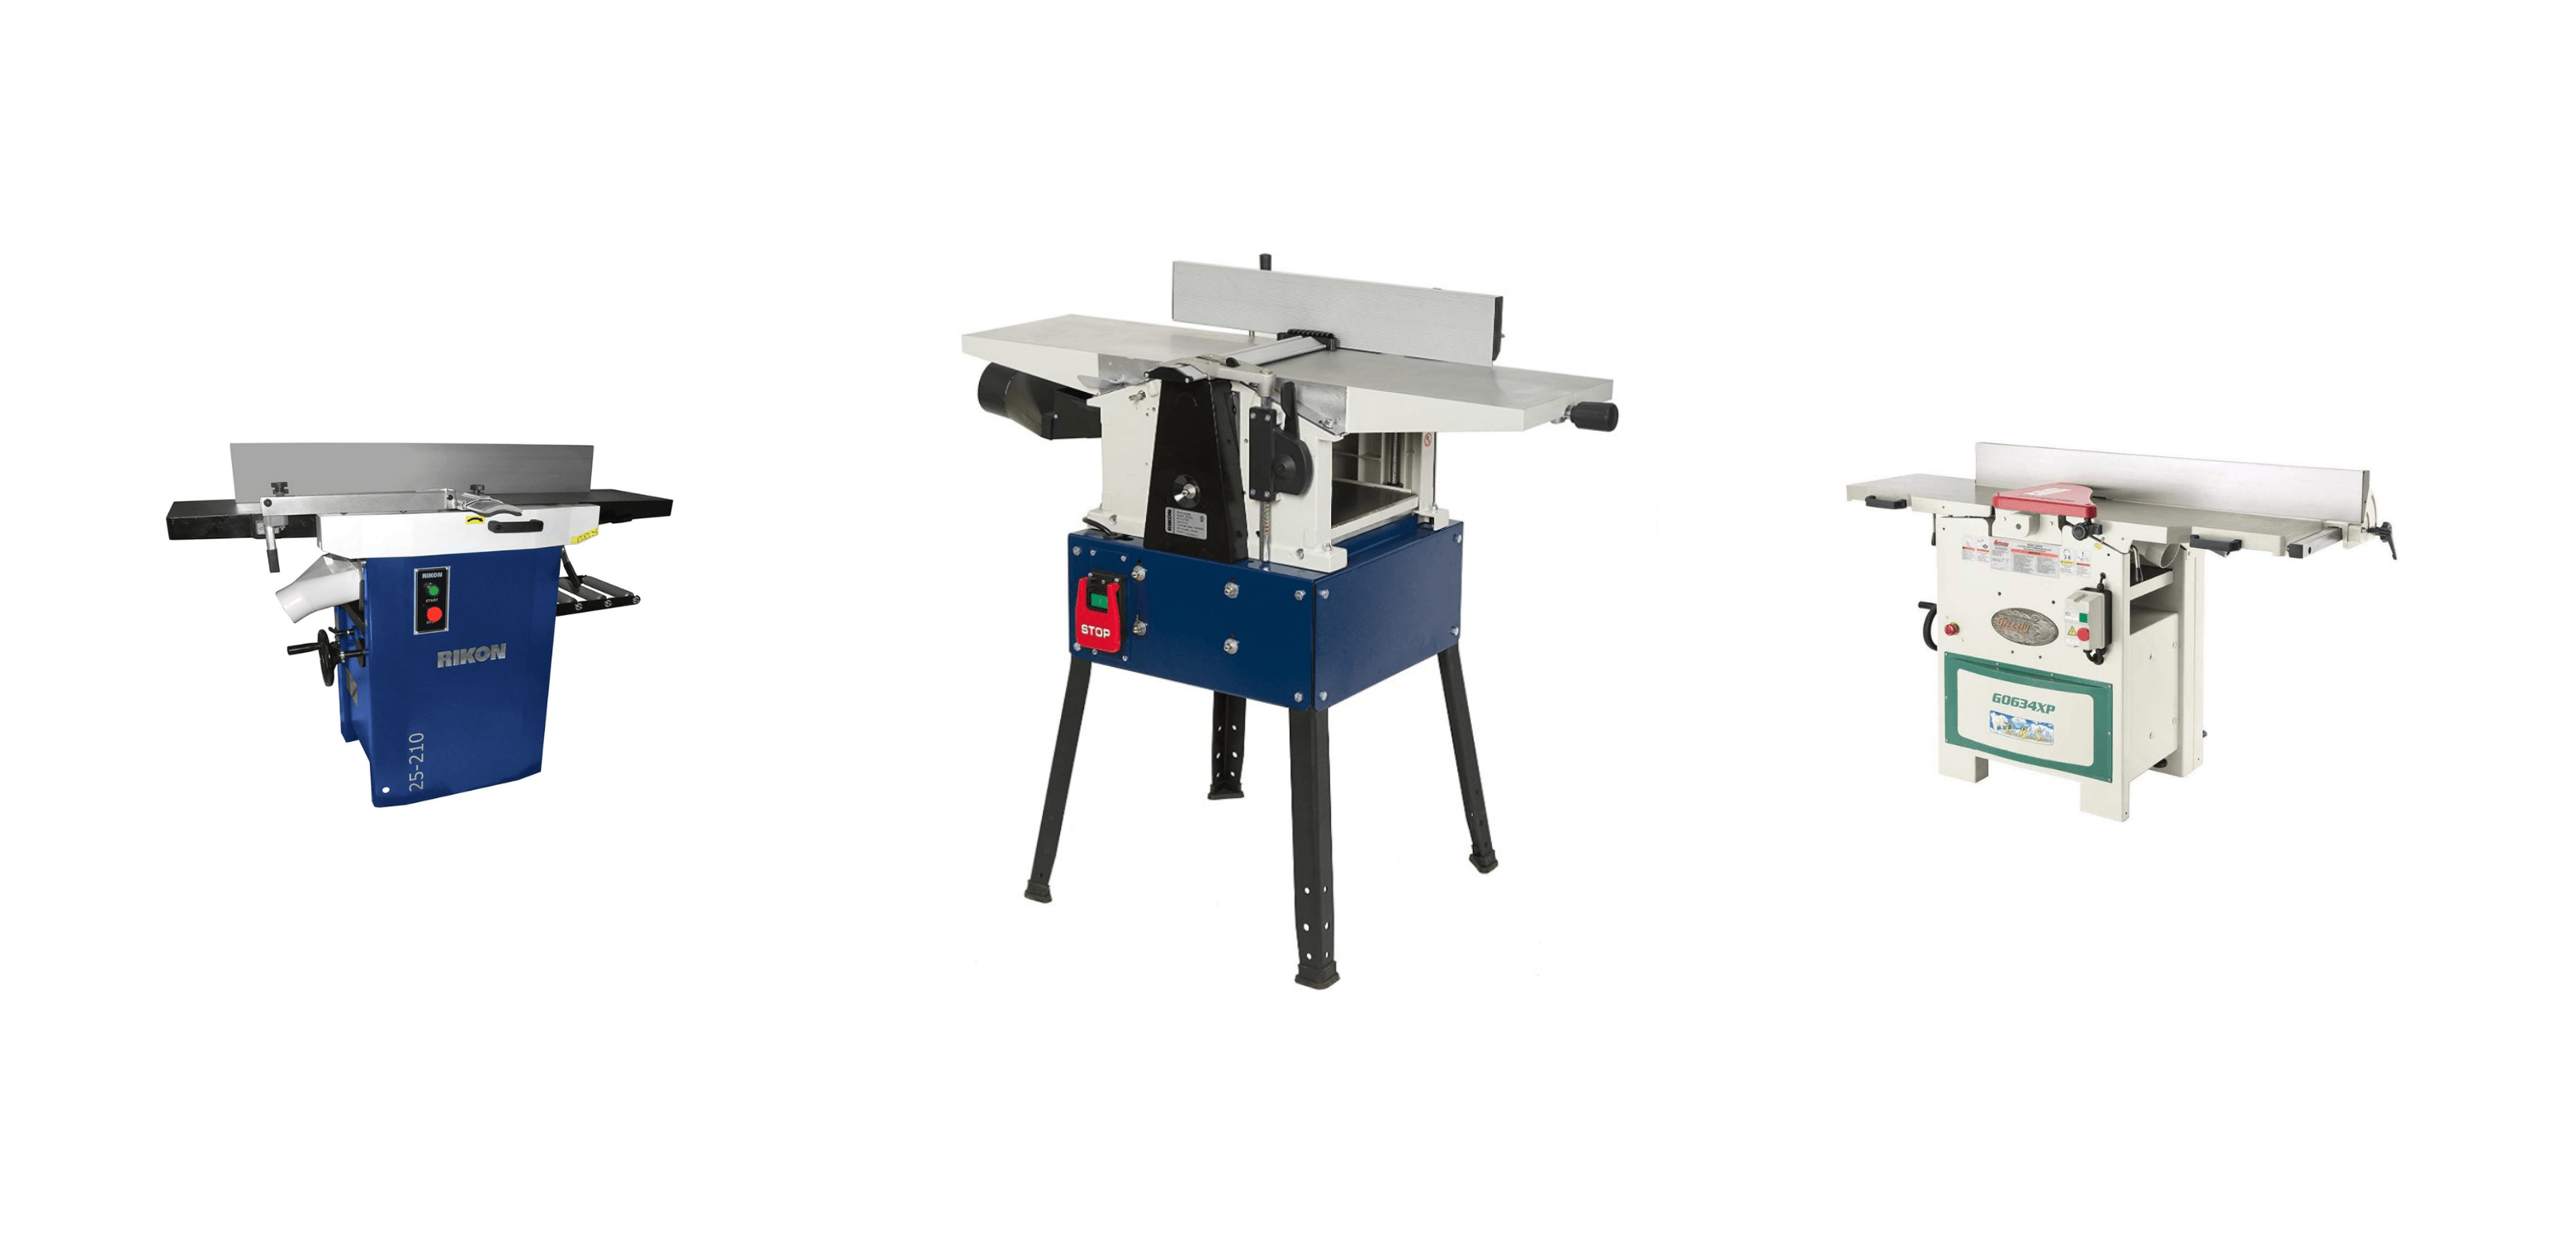 Best 12 Inches Jointer Planer Combo in Market